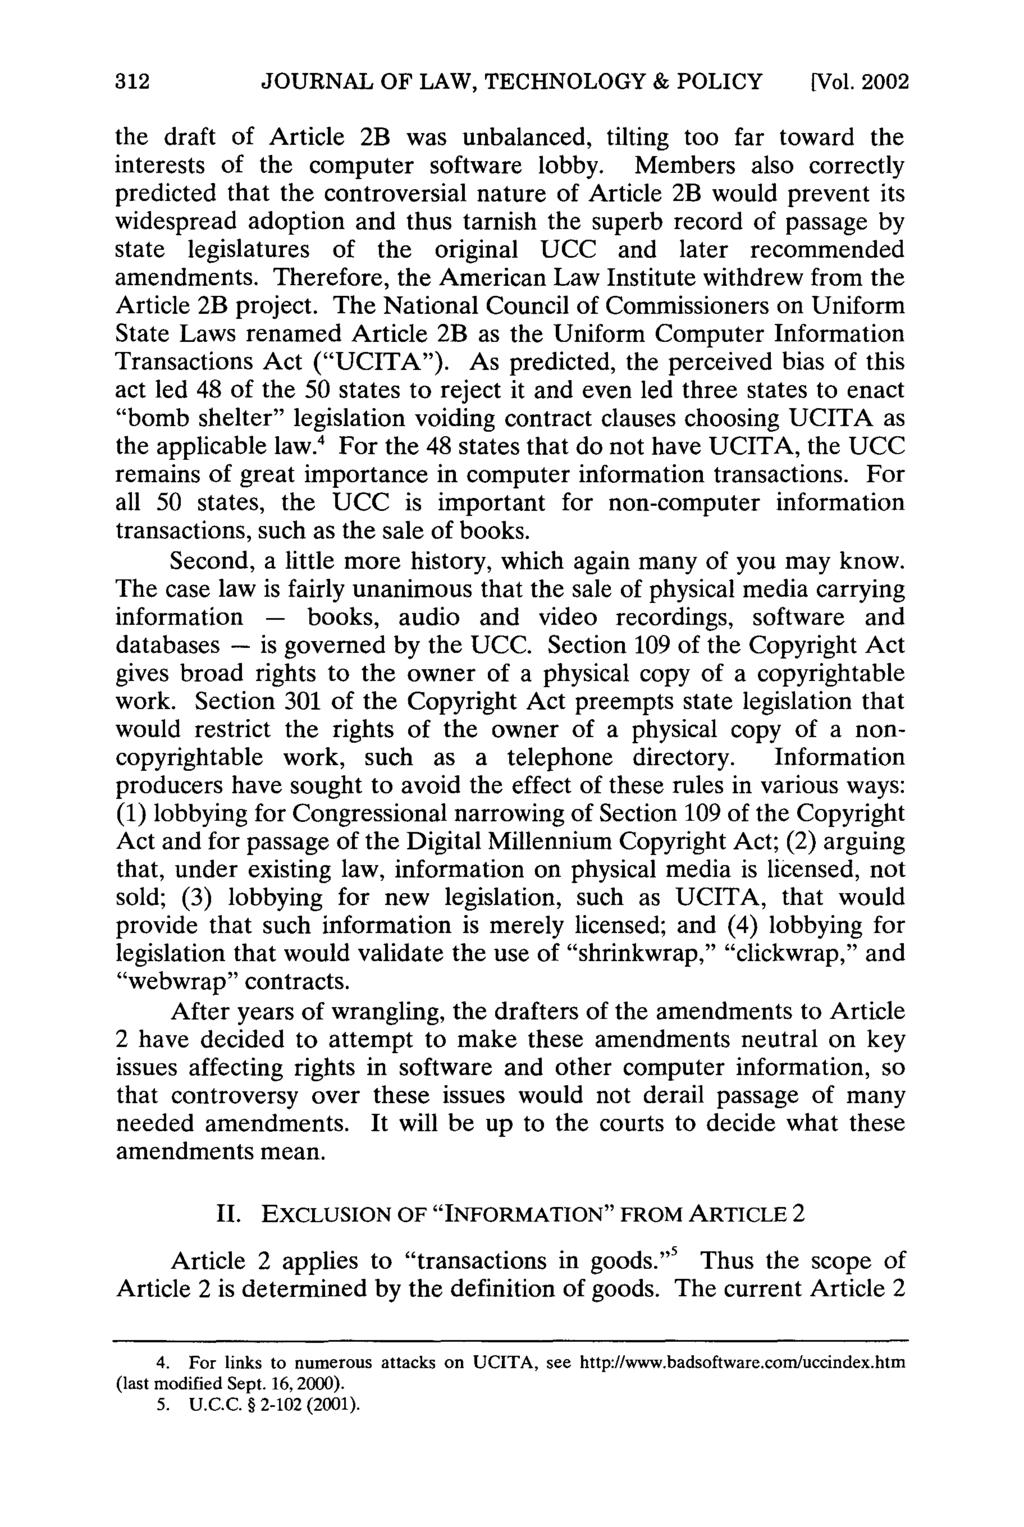 JOURNAL OF LAW, TECHNOLOGY & POLICY [Vol. 2002 the draft of Article 2B was unbalanced, tilting too far toward the interests of the computer software lobby.